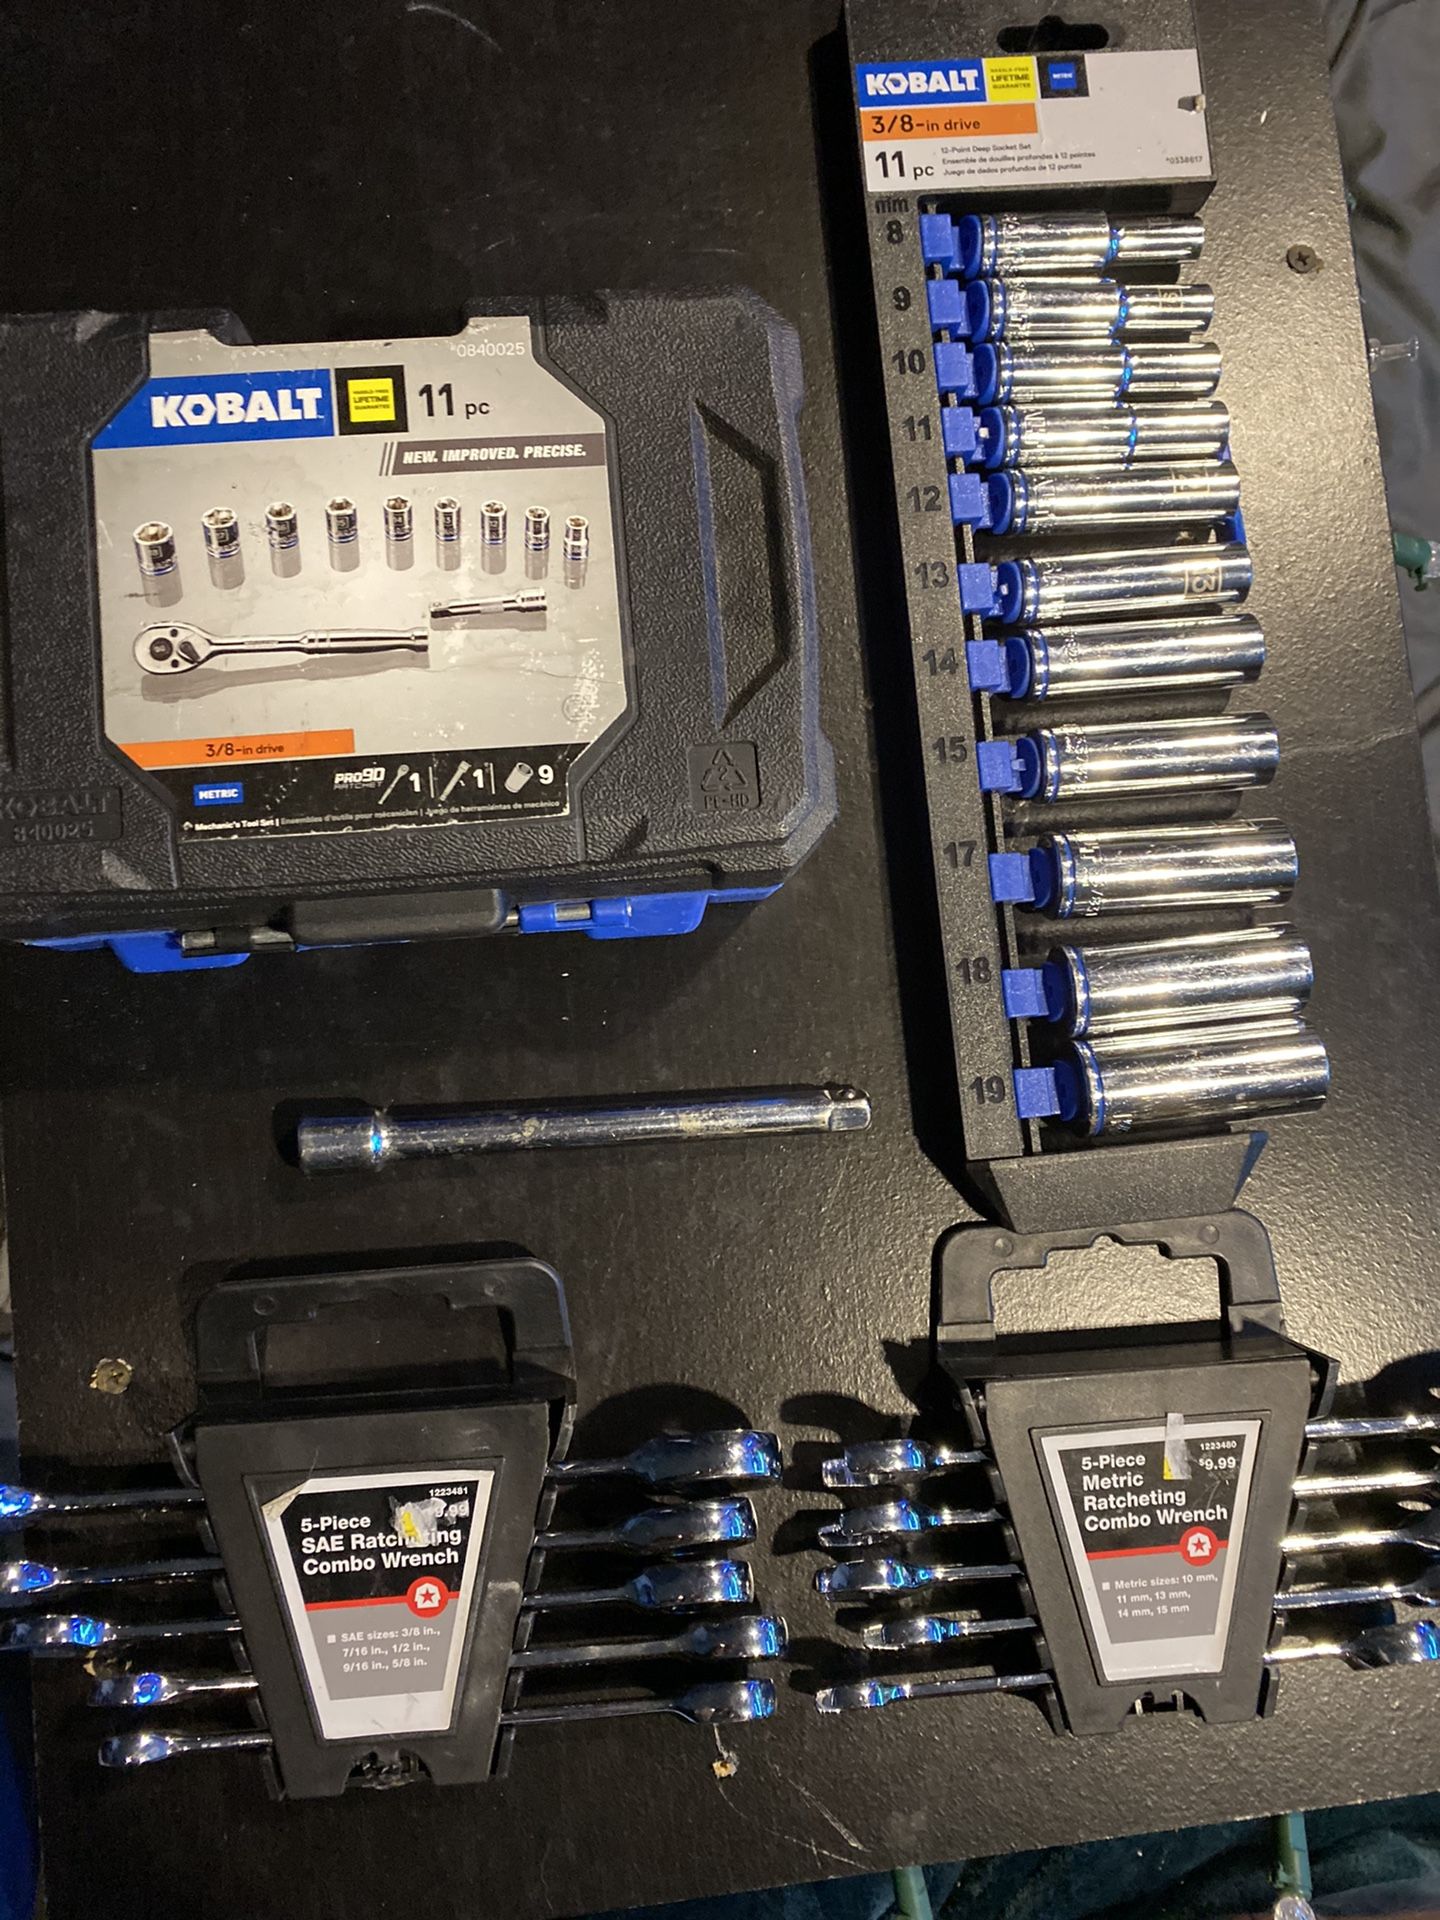 Kobalt 3/8” metric sockets and ratcheting combo wrenches